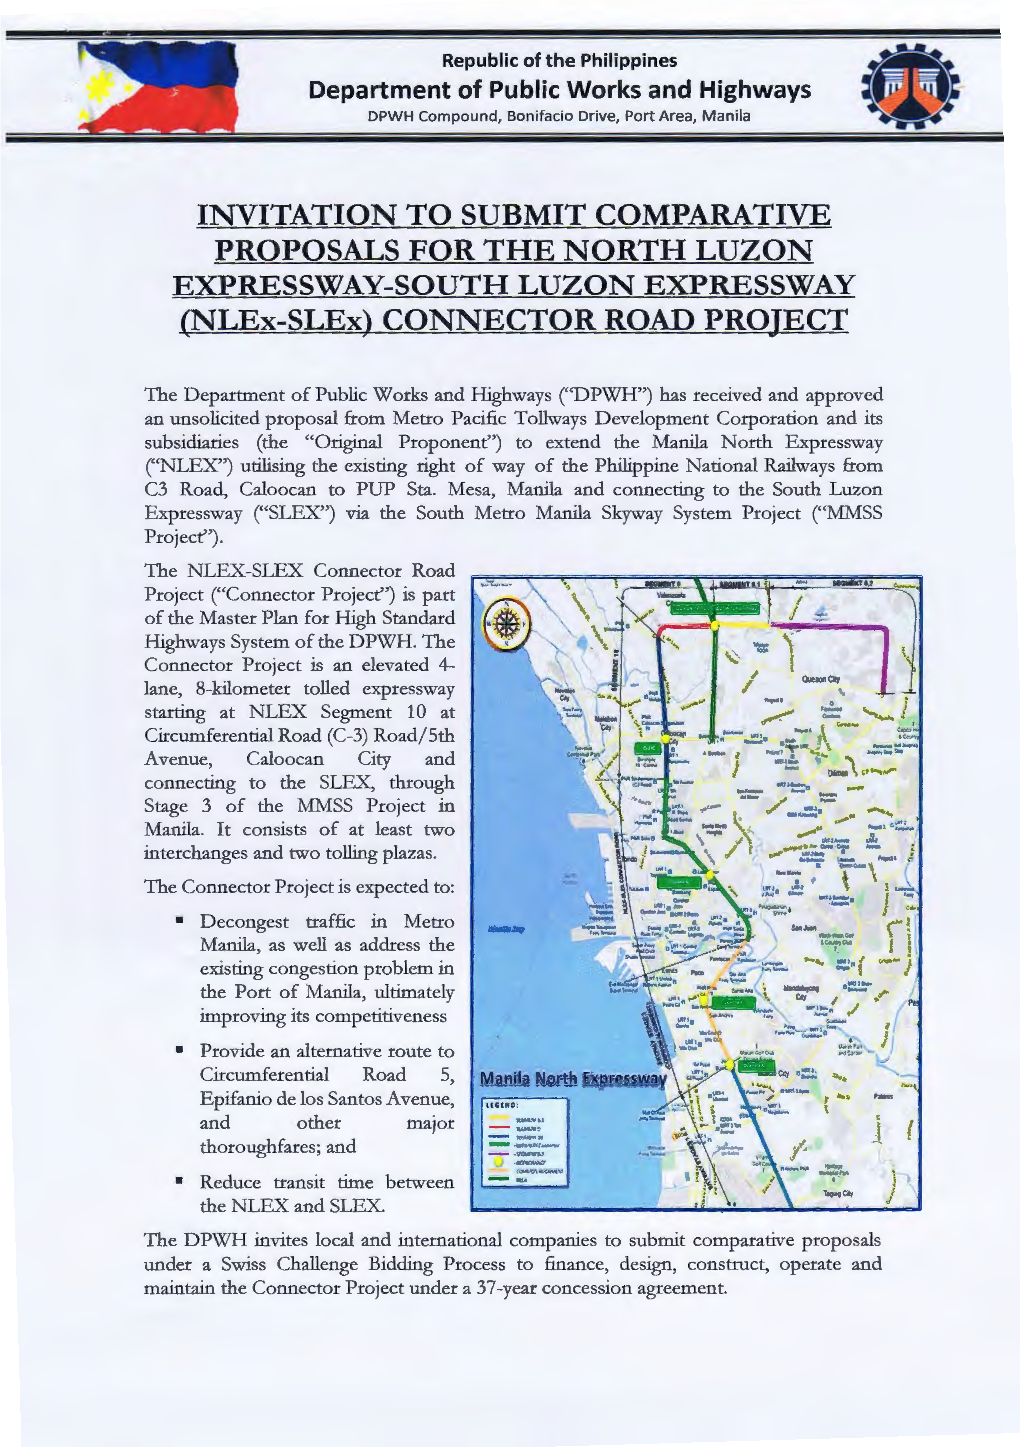 INVITATION to SUBMIT COMPARATIVE PROPOSALS for the NORTH LUZON EXPRESSWAY-SOUTH LUZON EXPRESSWAY (Nlex-Slex) CONNECTOR ROAD PROJECT